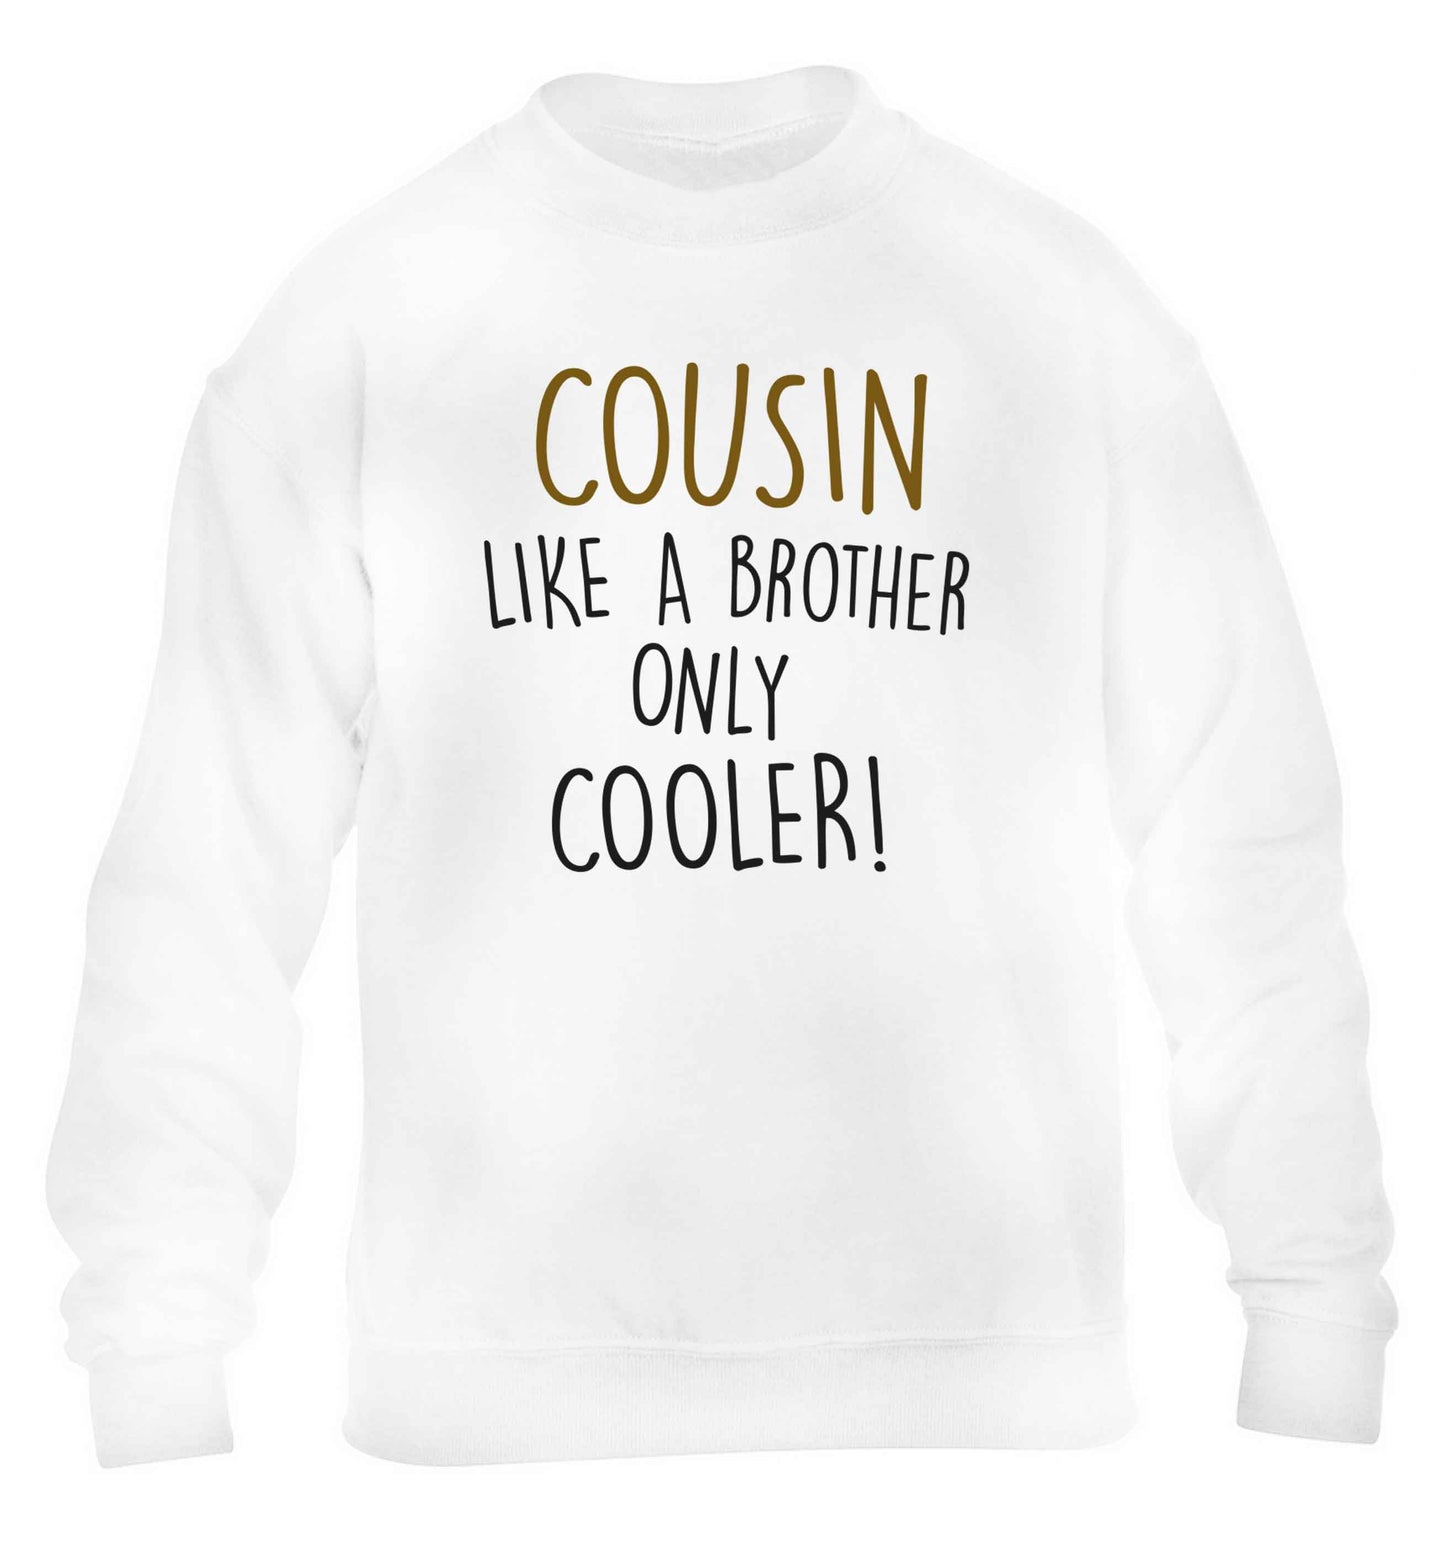 Cousin like a brother only cooler children's white sweater 12-13 Years